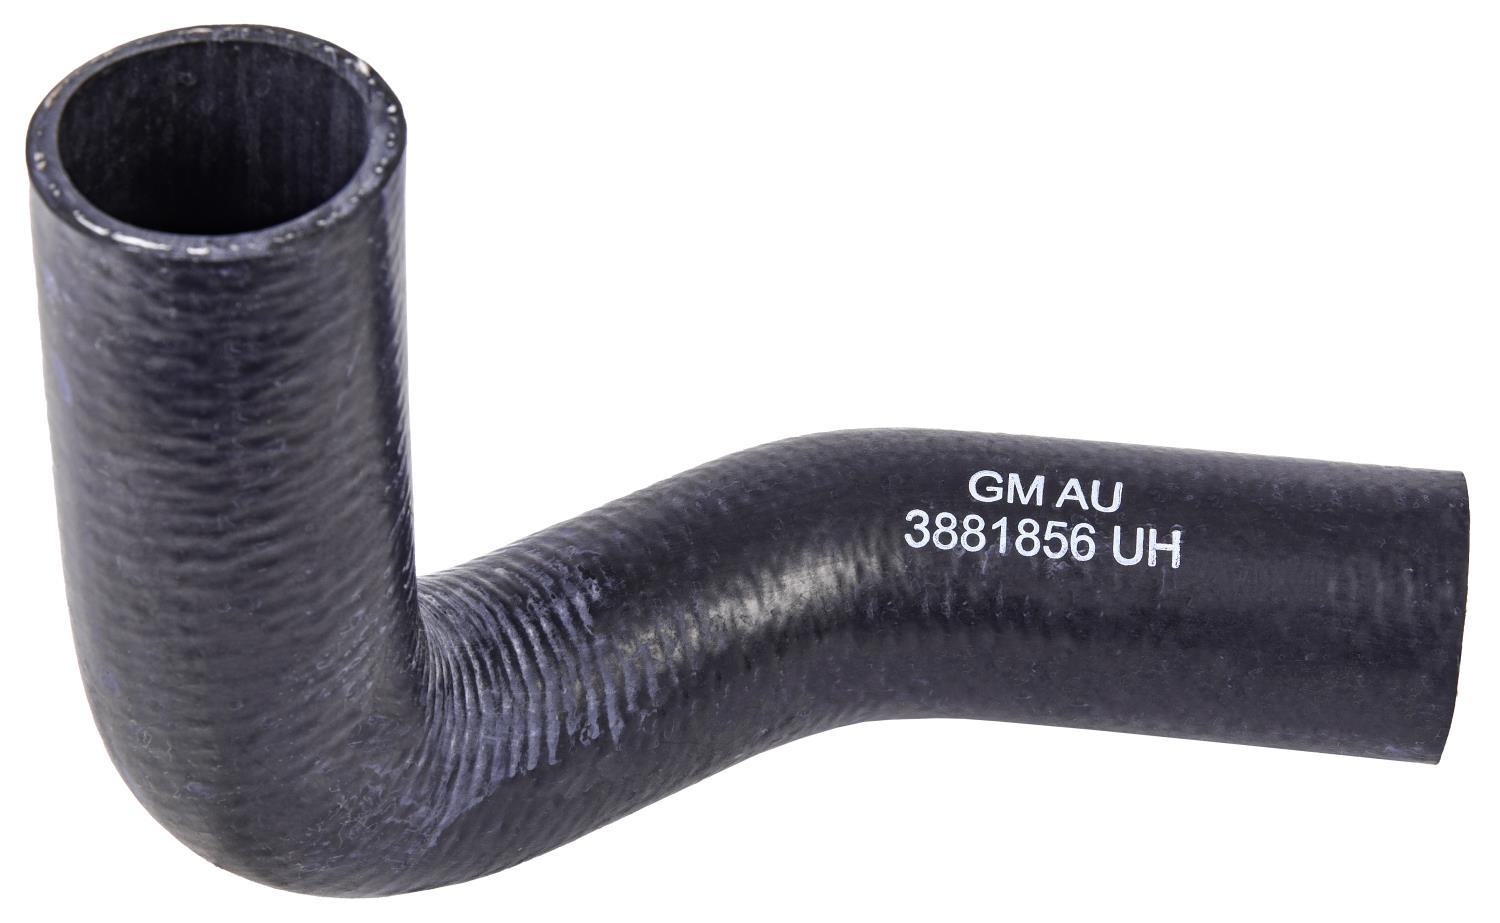 Lower Radiator Hose for 1966-1967 Chevrolet Chevy II Nova [Direct-Fit Replacement for GM 3881856]